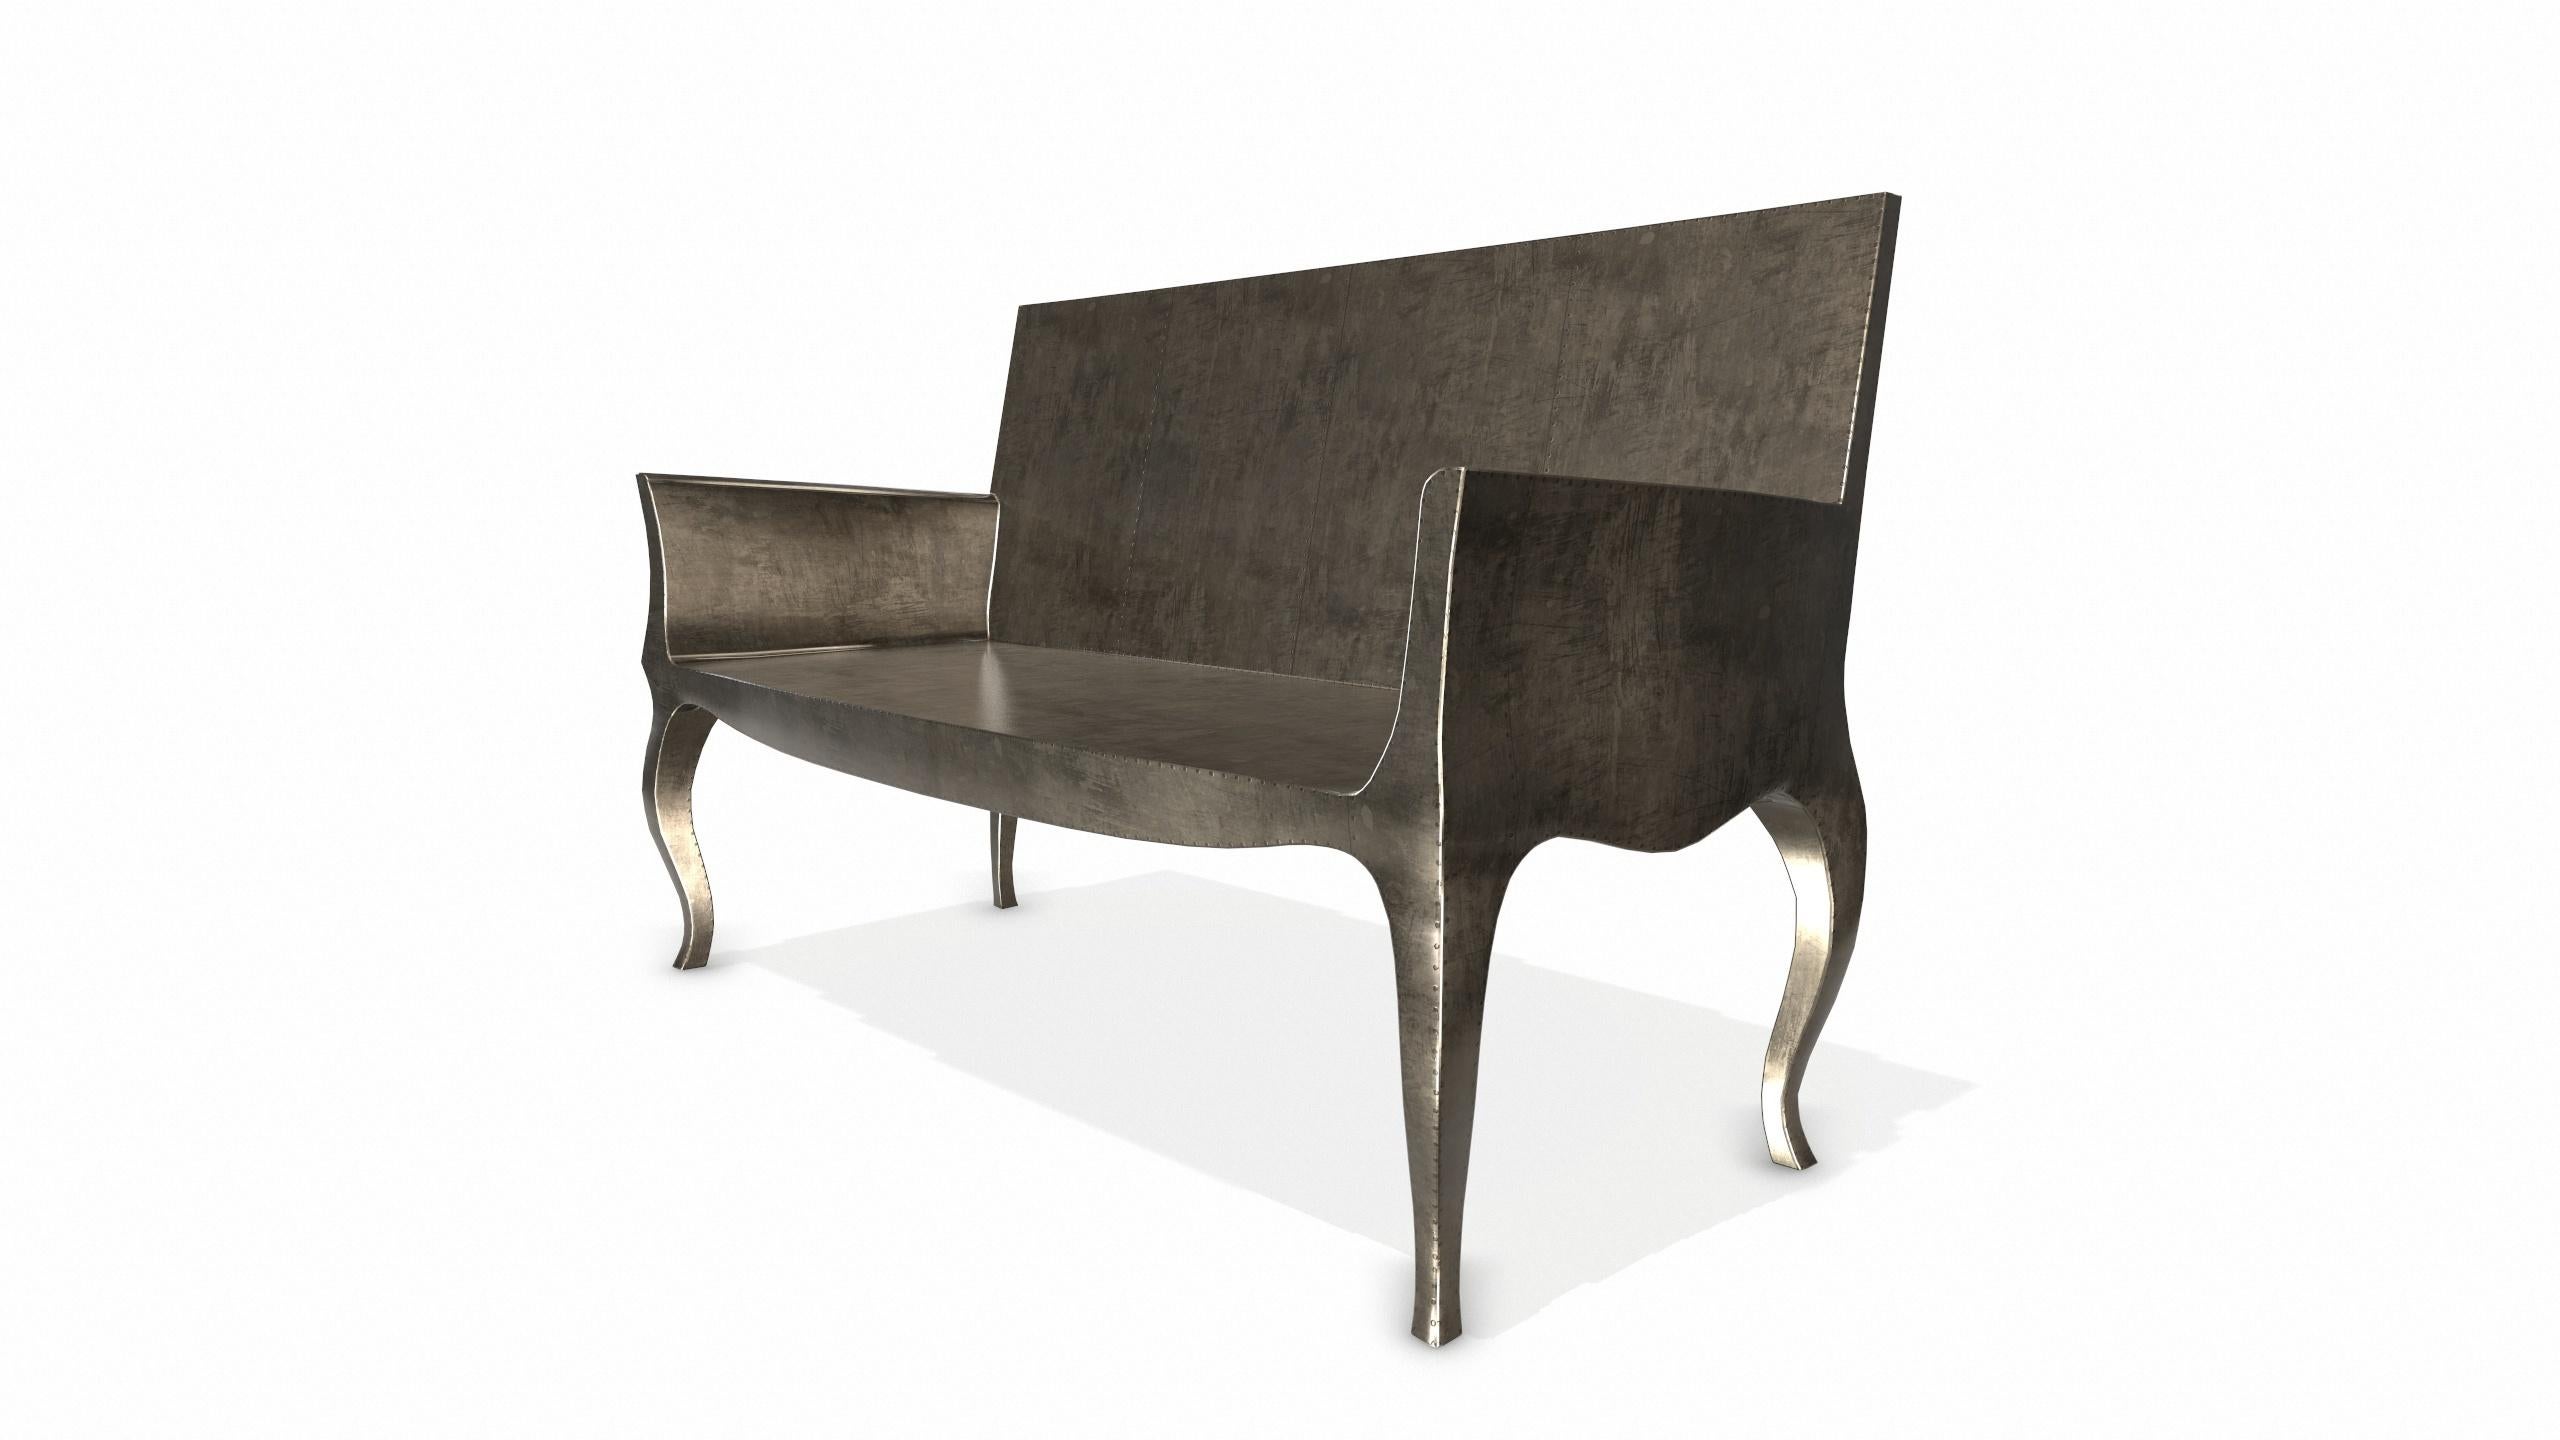 Hand-Crafted Louise Settee Art Deco Loveseats in Smooth Antique Bronze by Paul Mathieu For Sale